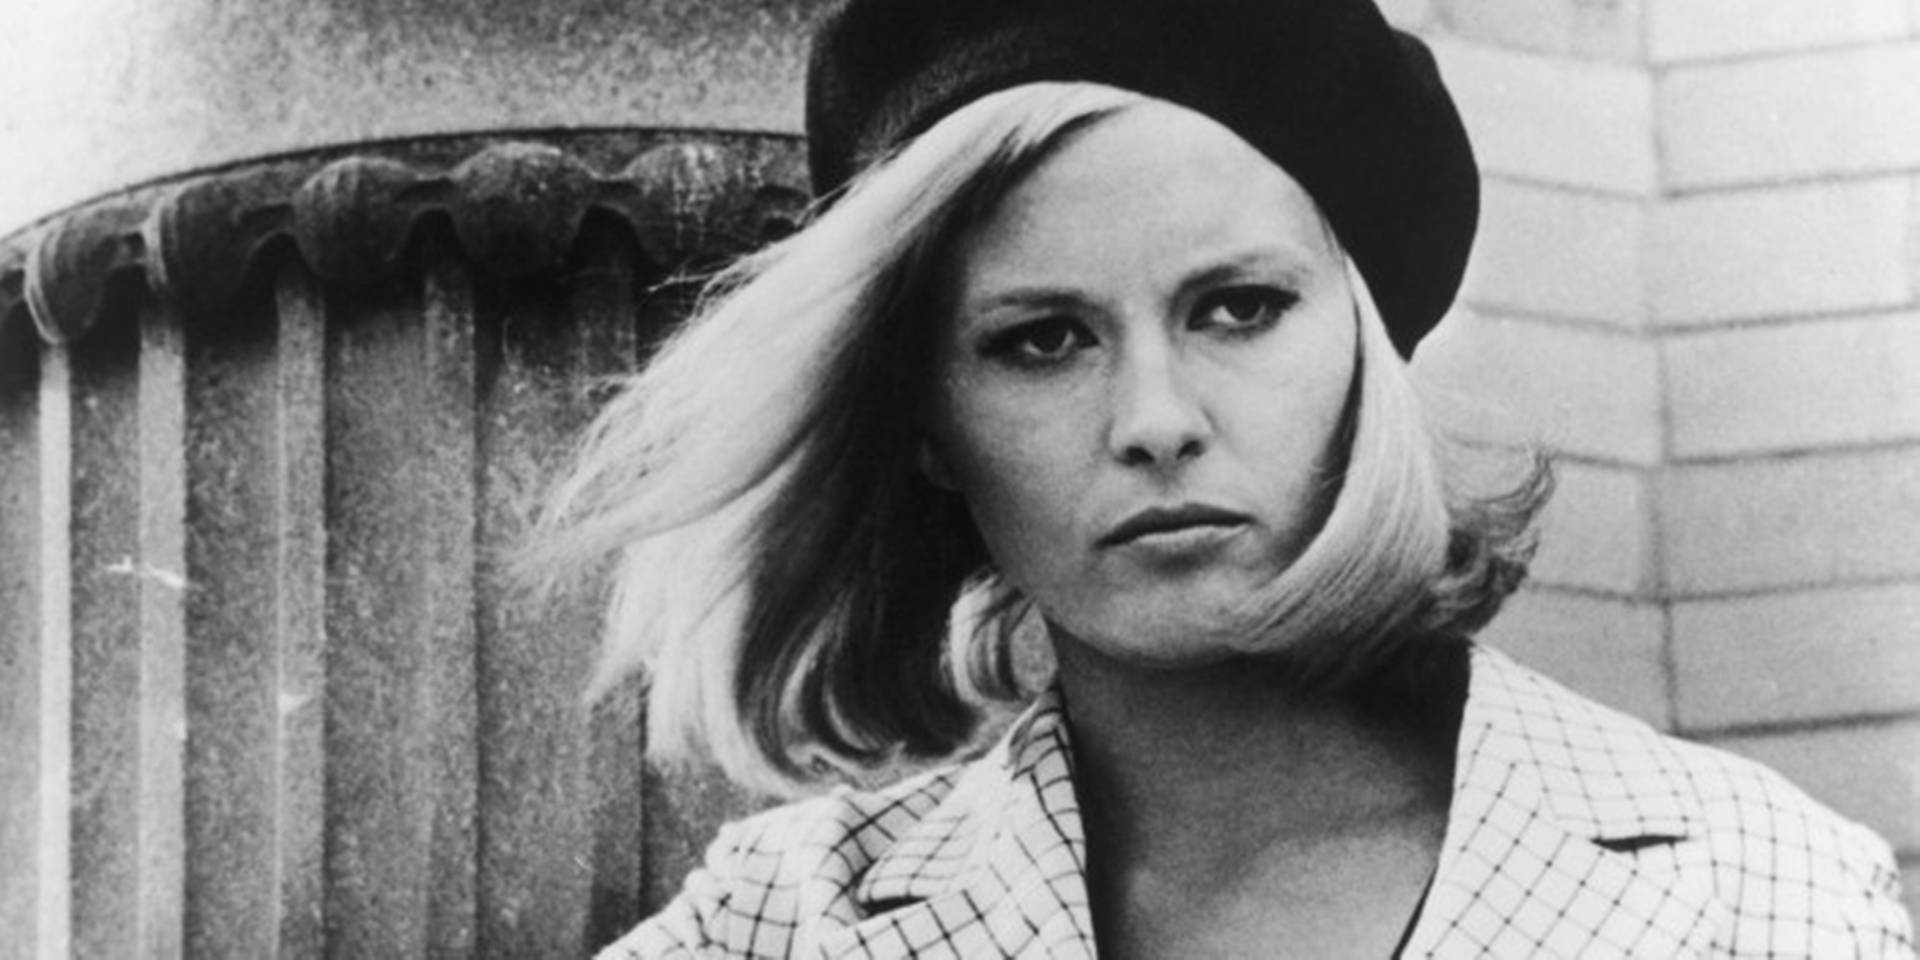 Faye Dunaway As Bonnie Parker In The Classic Movie Bonnie And Clyde (1967)